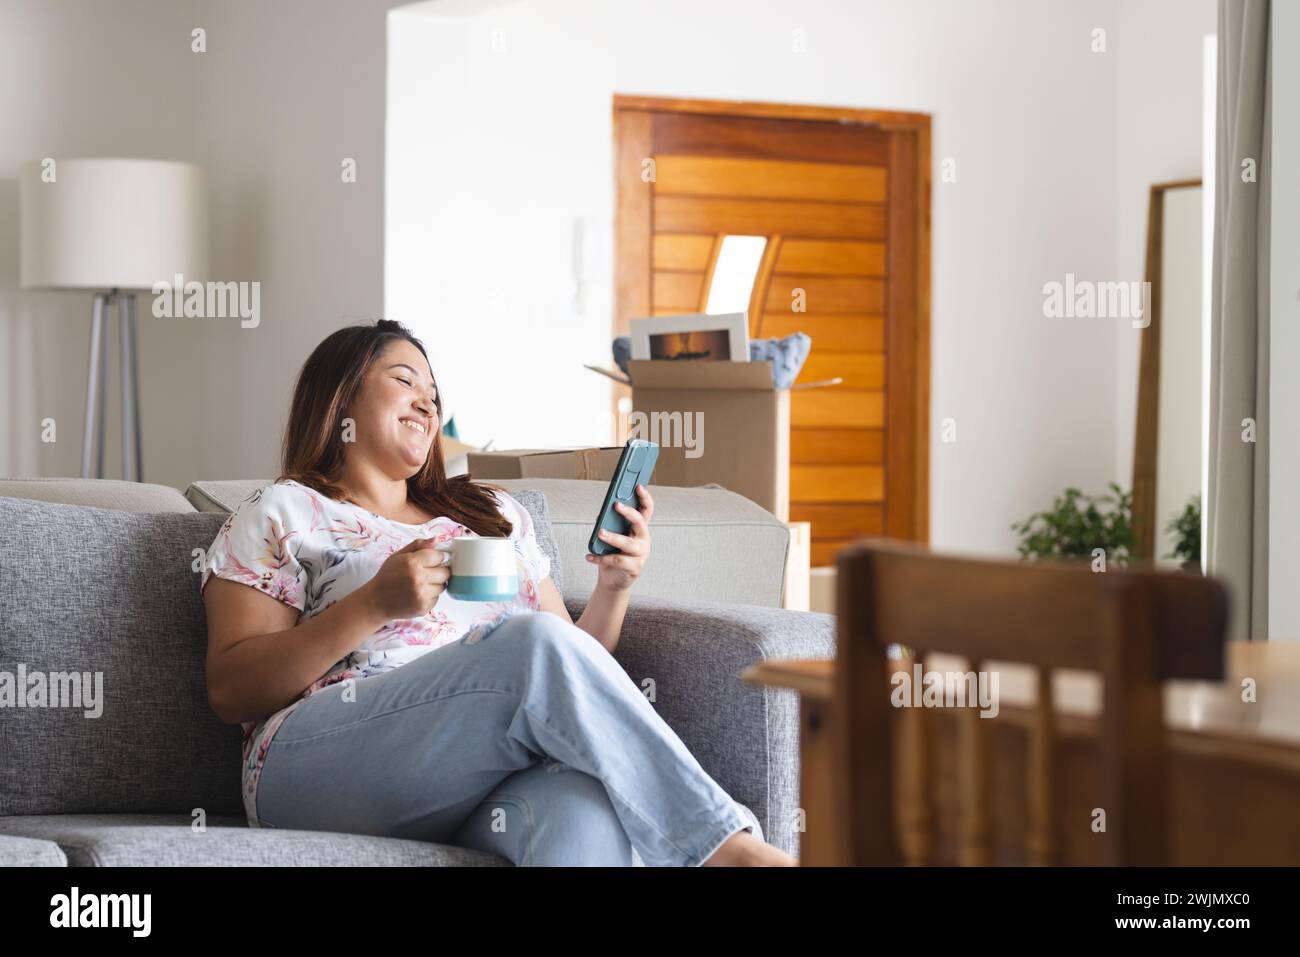 Plus-size biracial woman happily video calls amid moving boxes at home. Stock Photo